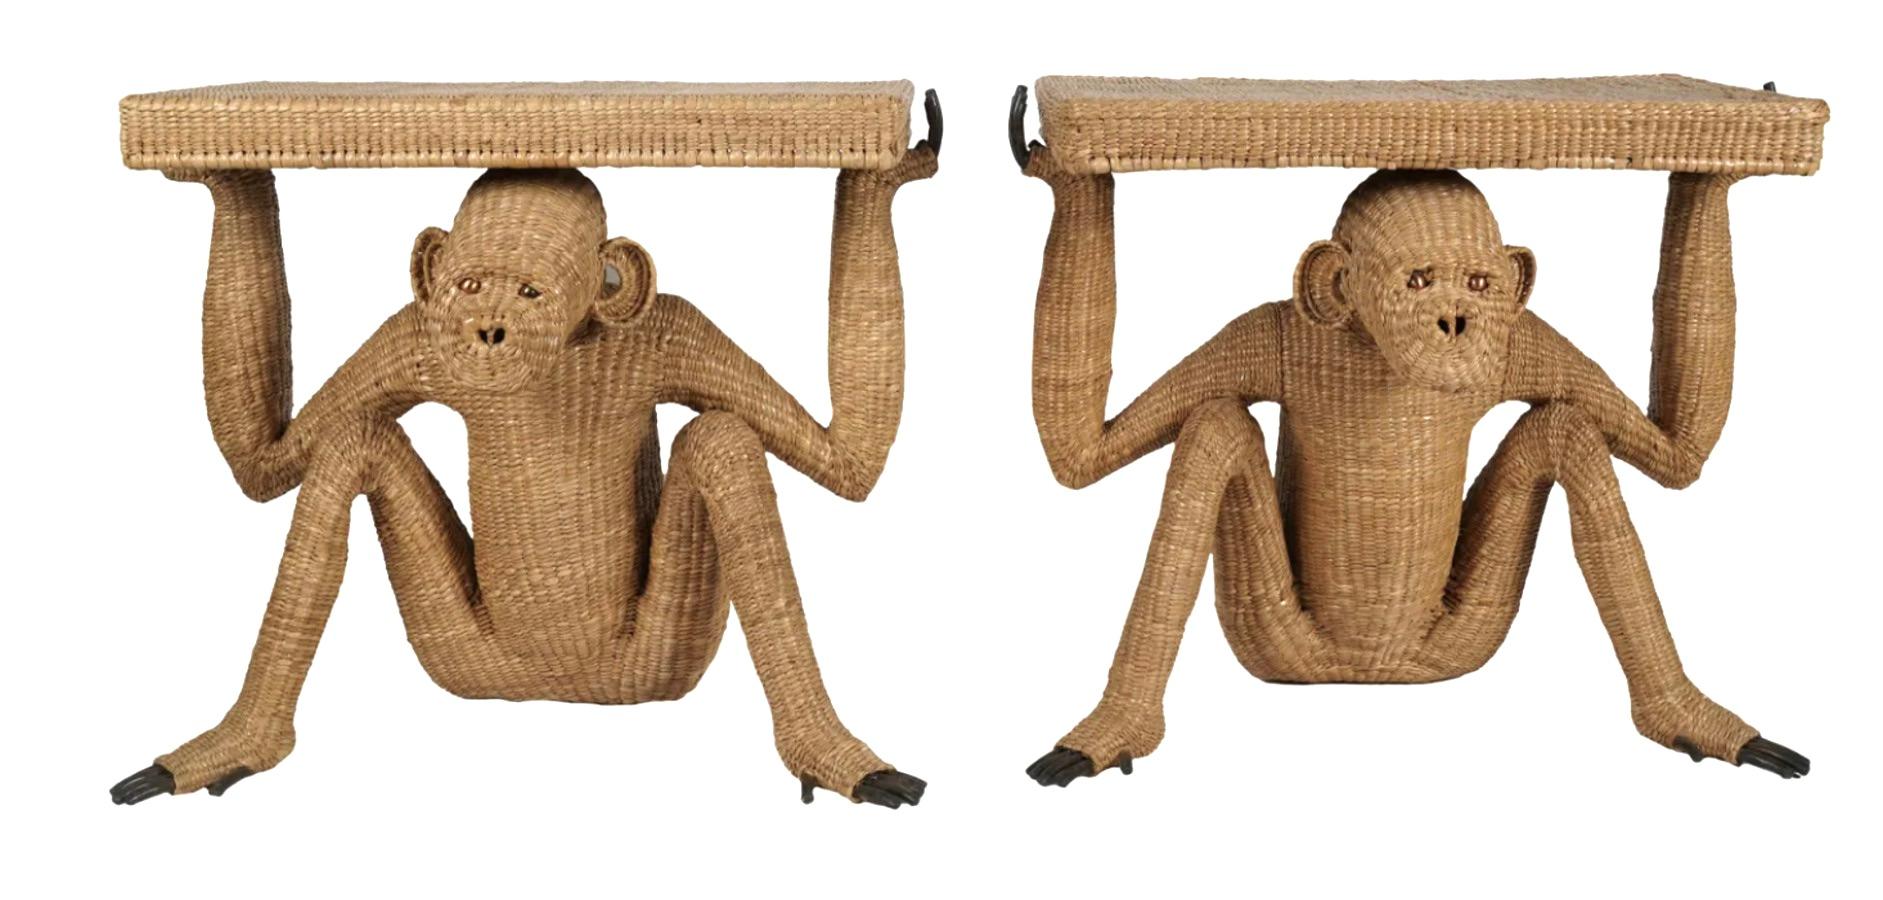 Pair of Console Tables by Mexican Artist, Mario Lopez Torres.  The tables are held by a hand-woven rattan monkey -  A steel frame with Hand-woven rattan is the base and body, while the hands feet and eye are steel and brass.  The Monkey holding the